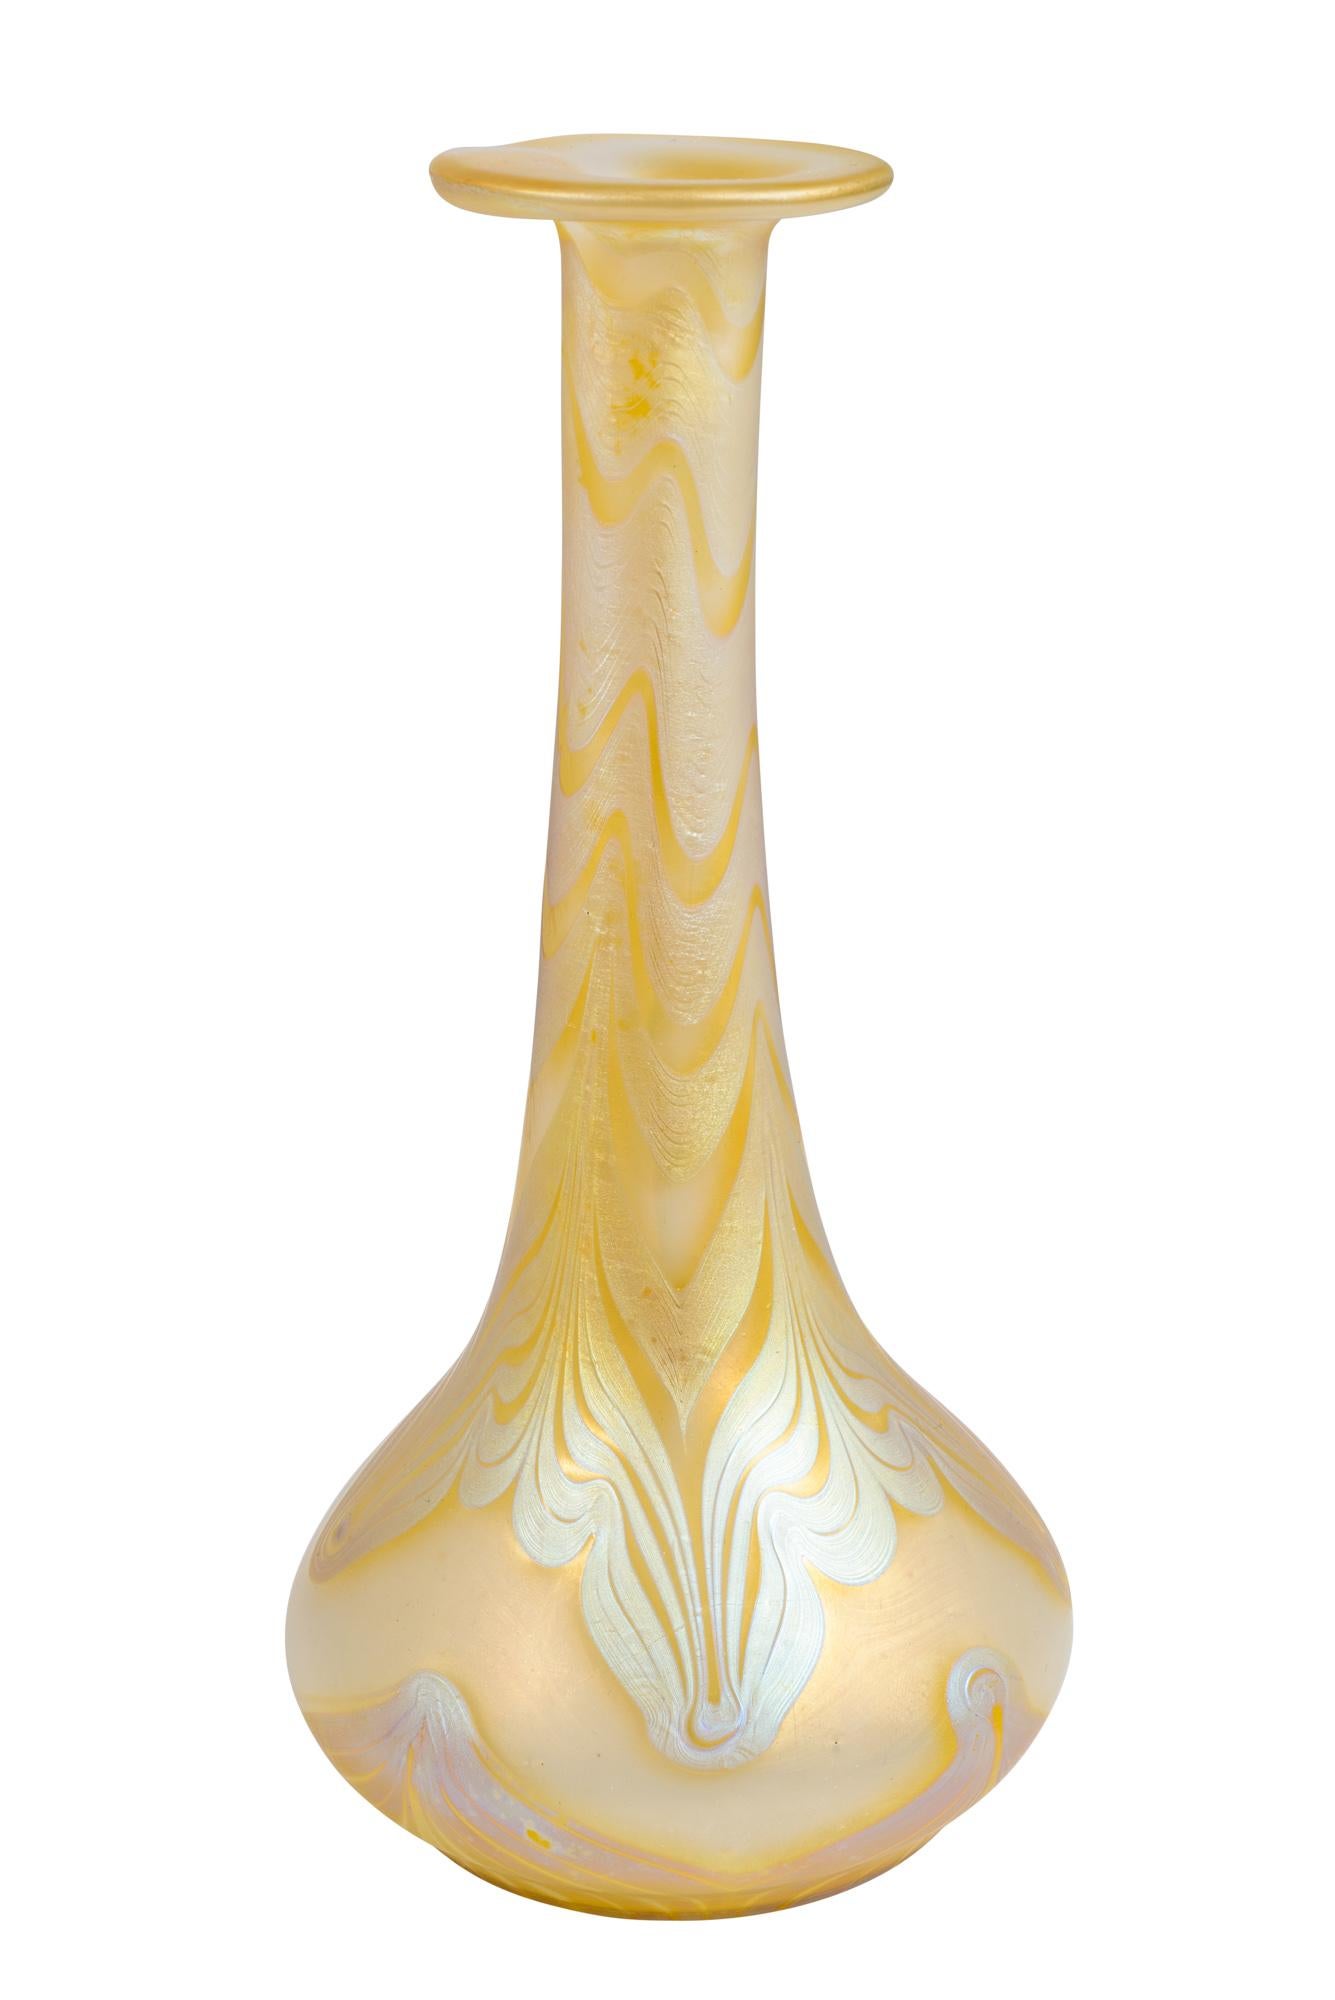 Austrian Jugendstil Johann Loetz-Witwe Vase Decor Phenomen Genre 202 Signed  1899

This Loetz vase has a simple and elegant shape: in the lower third it appears bulbous, the vessel itself tapers upwards to a slender neck. The end is formed by a